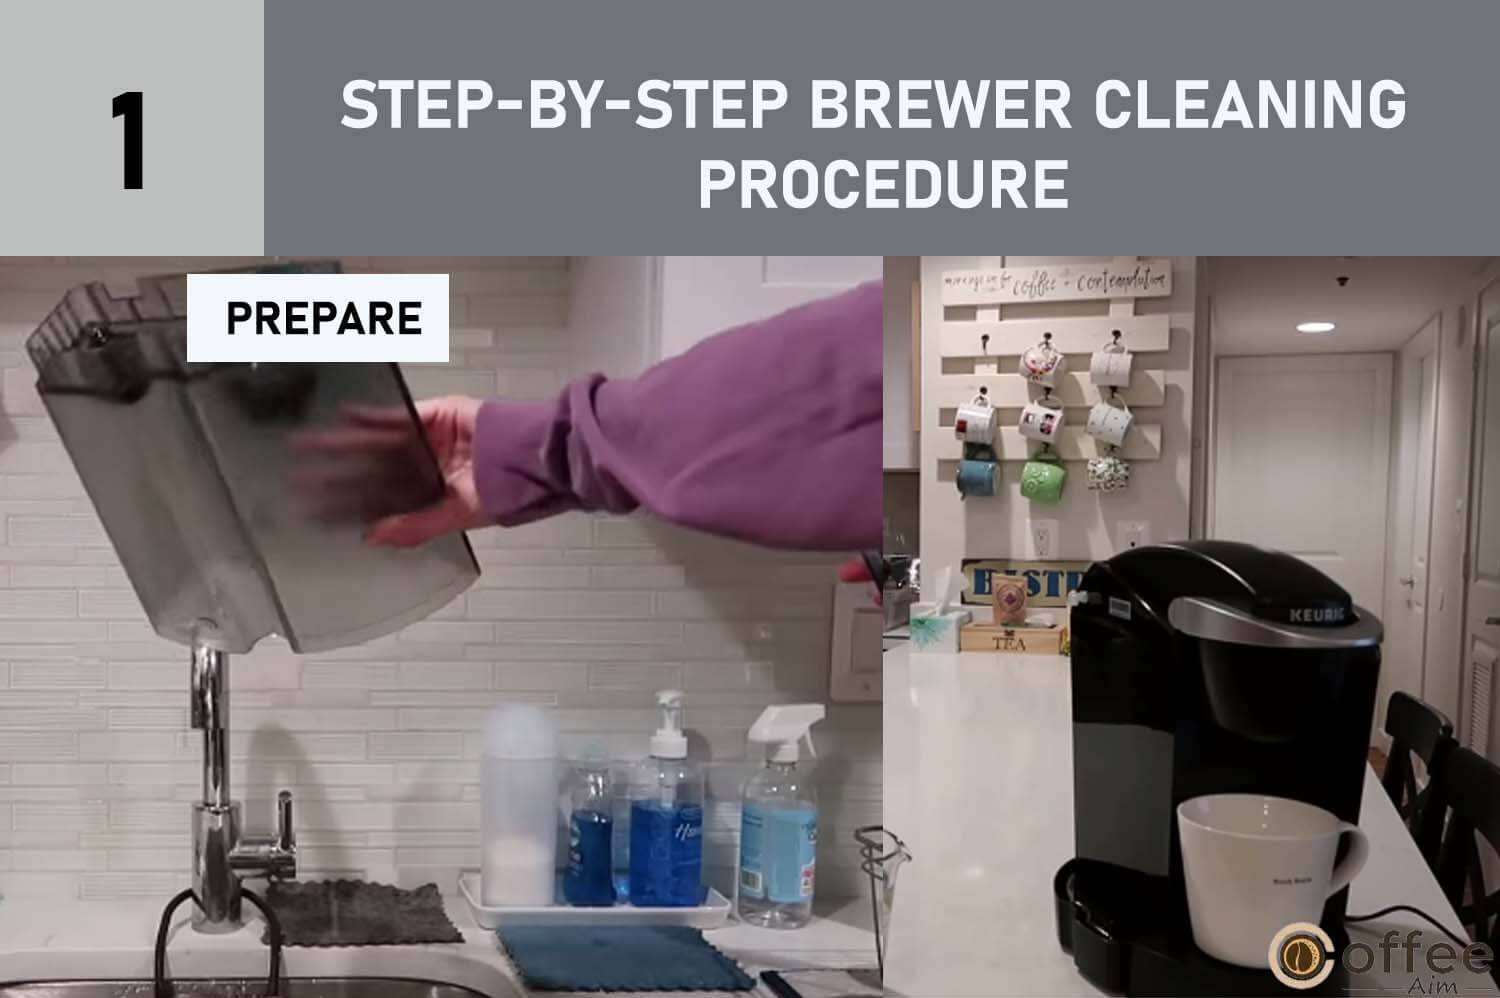 This image illustrates the meticulous "PREPARATION" required for the comprehensive "Step-by-Step Brewer Cleaning Procedure" outlined in the article "How to Use Keurig B-40."